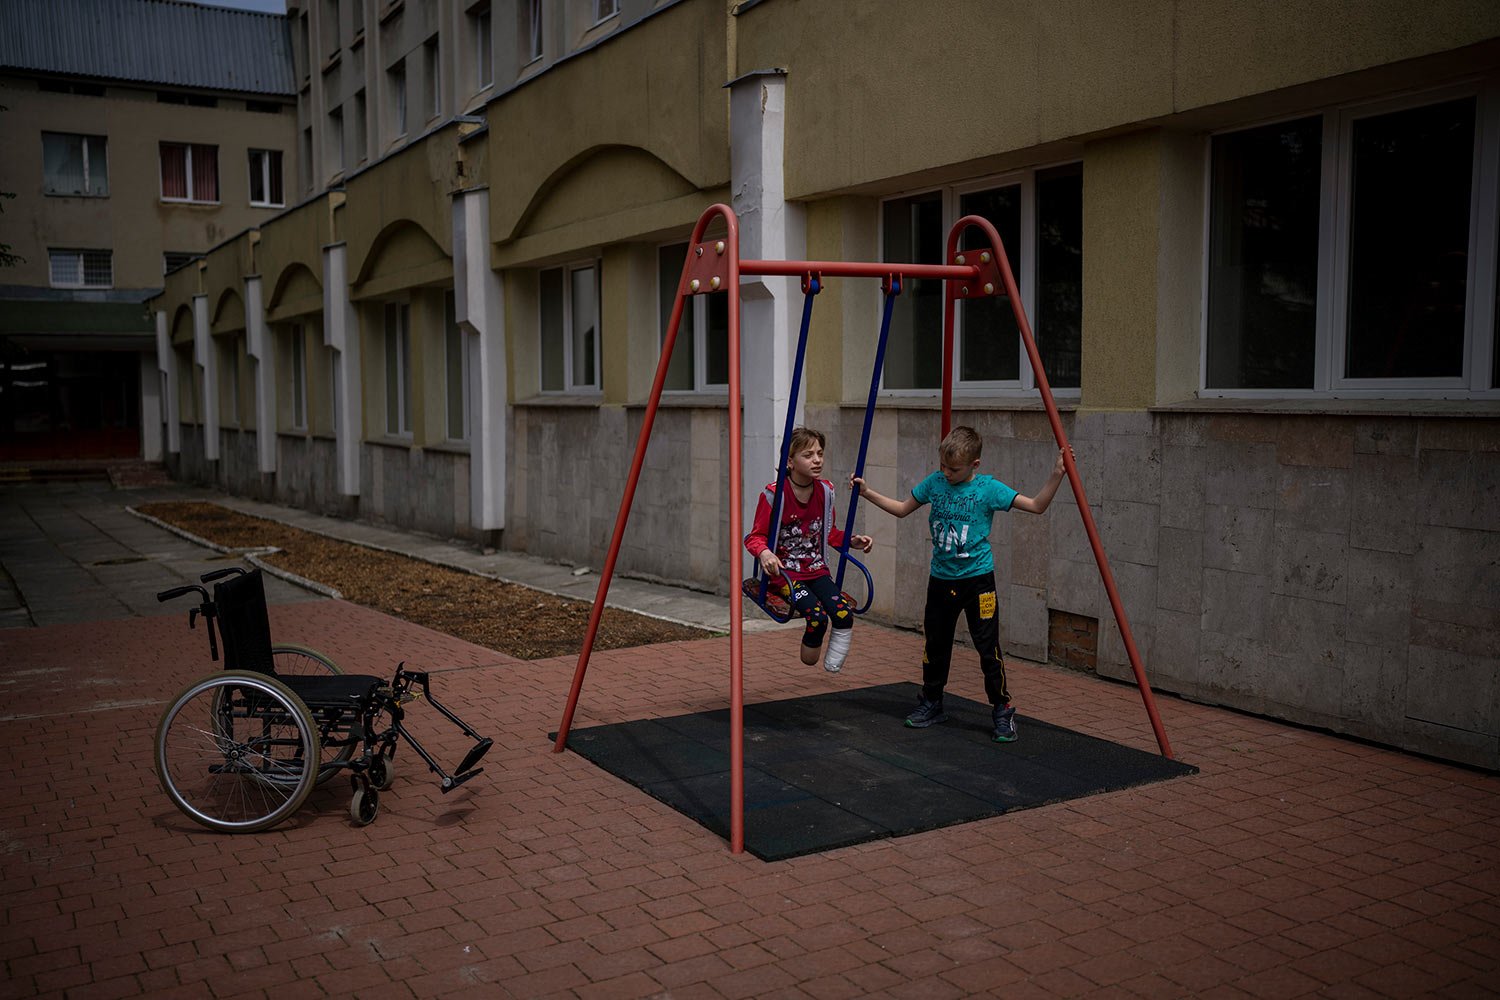  Yarik Stepanenko, 11, pushes his twin-sister Yana on a swing outside a public hospital in Lviv, Ukraine, Thursday, May 12, 2022. On April 8, a missile struck the train station in the eastern city of Kramatorsk where Yana, Yarik and their mother Nata